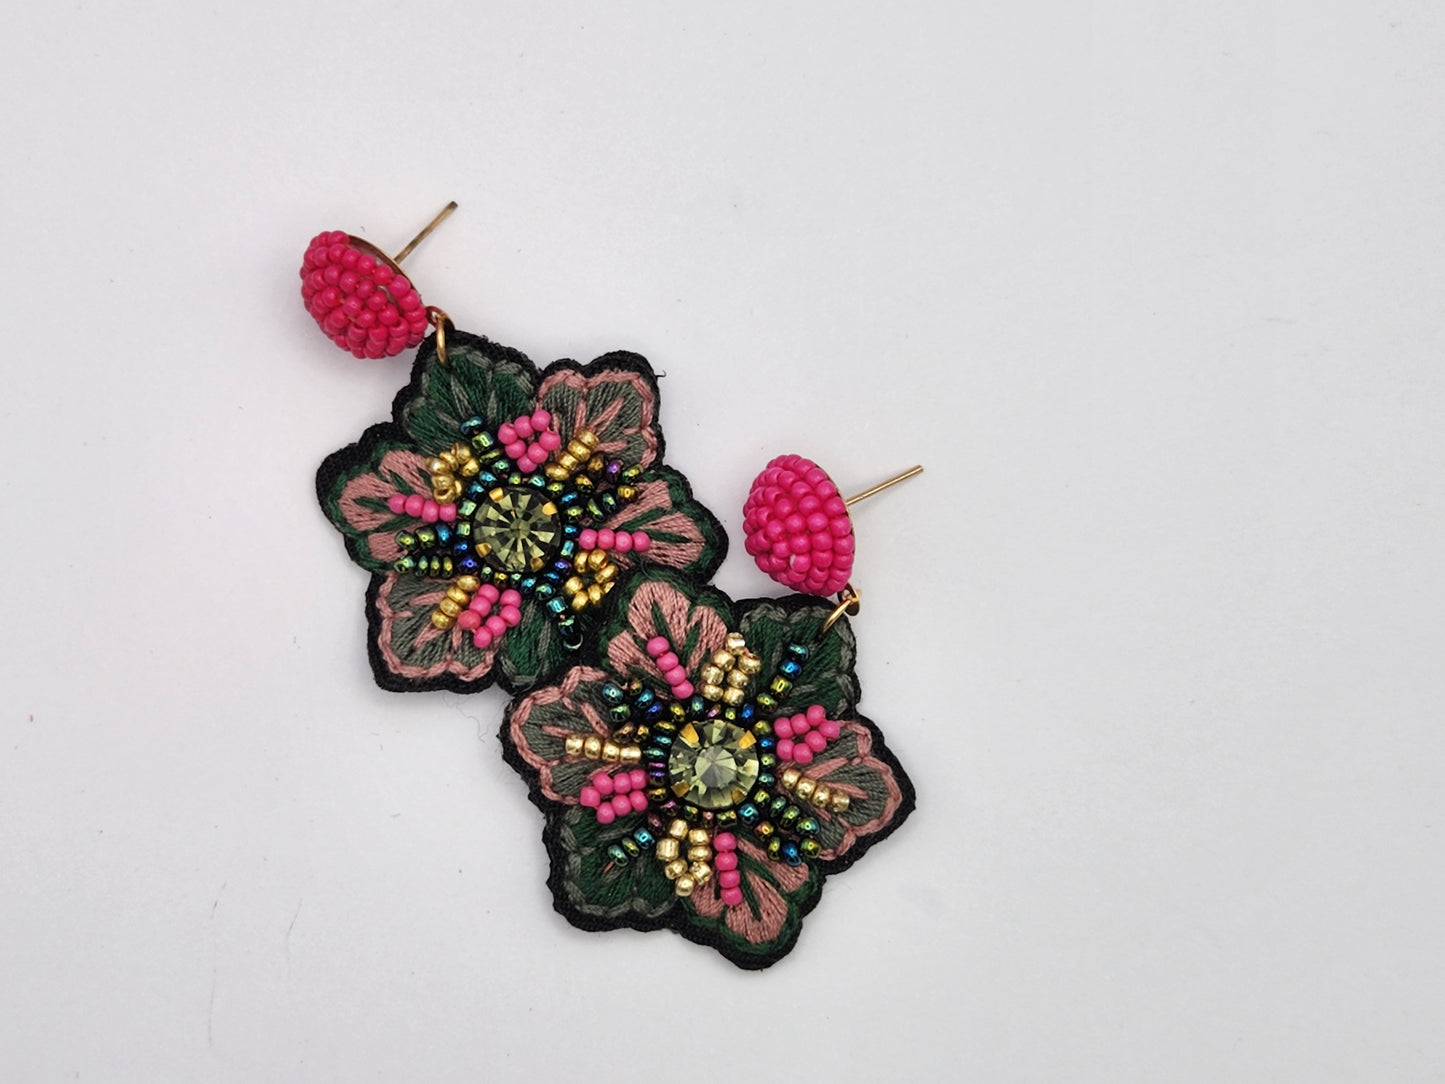 Embroidered Floral